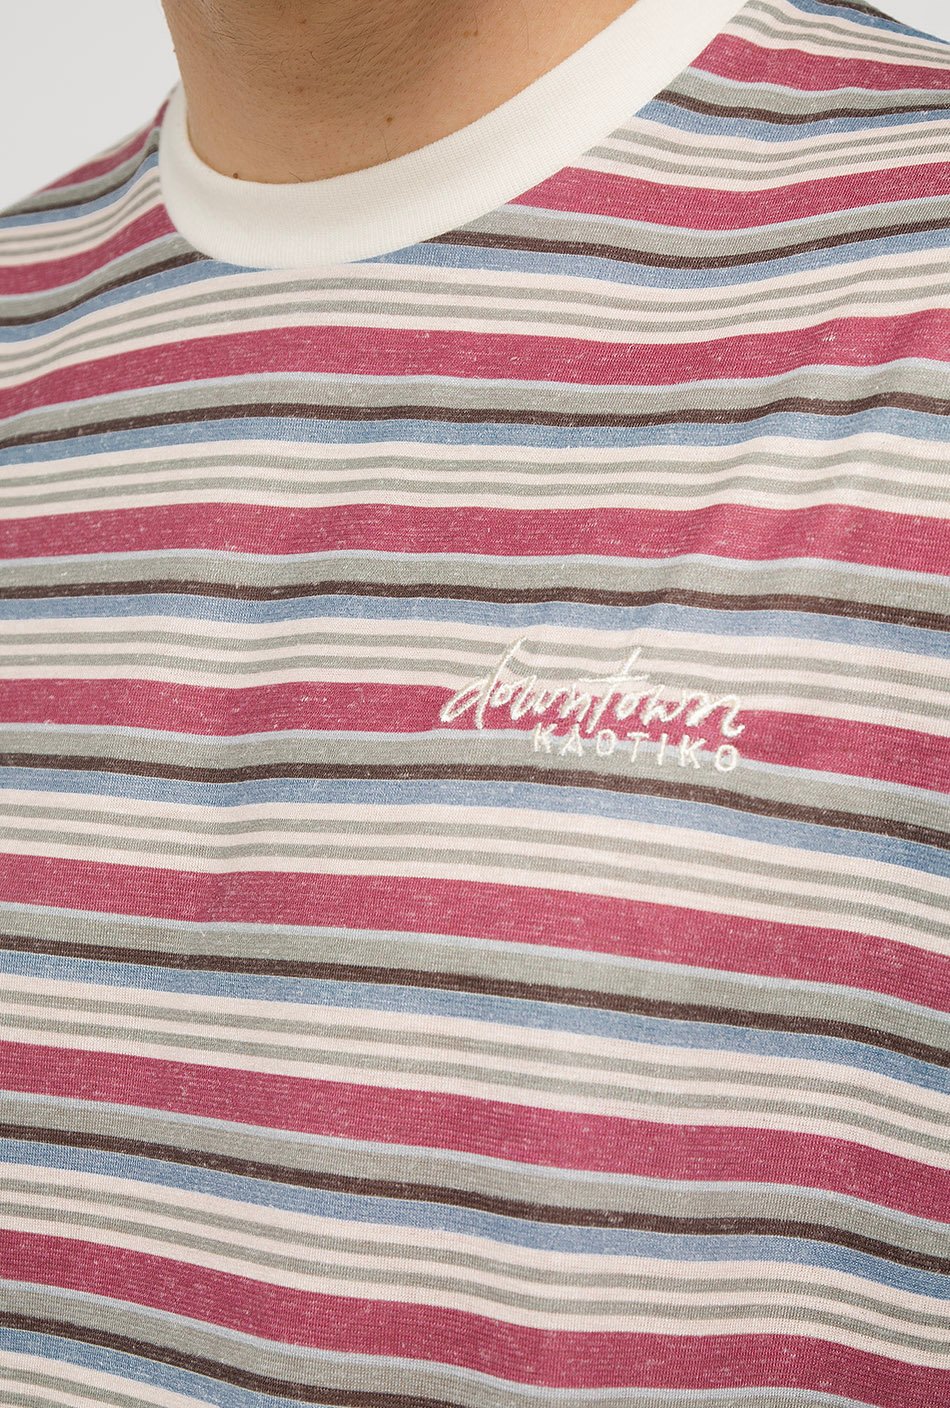 Downtown Stripes Red T-Shirt